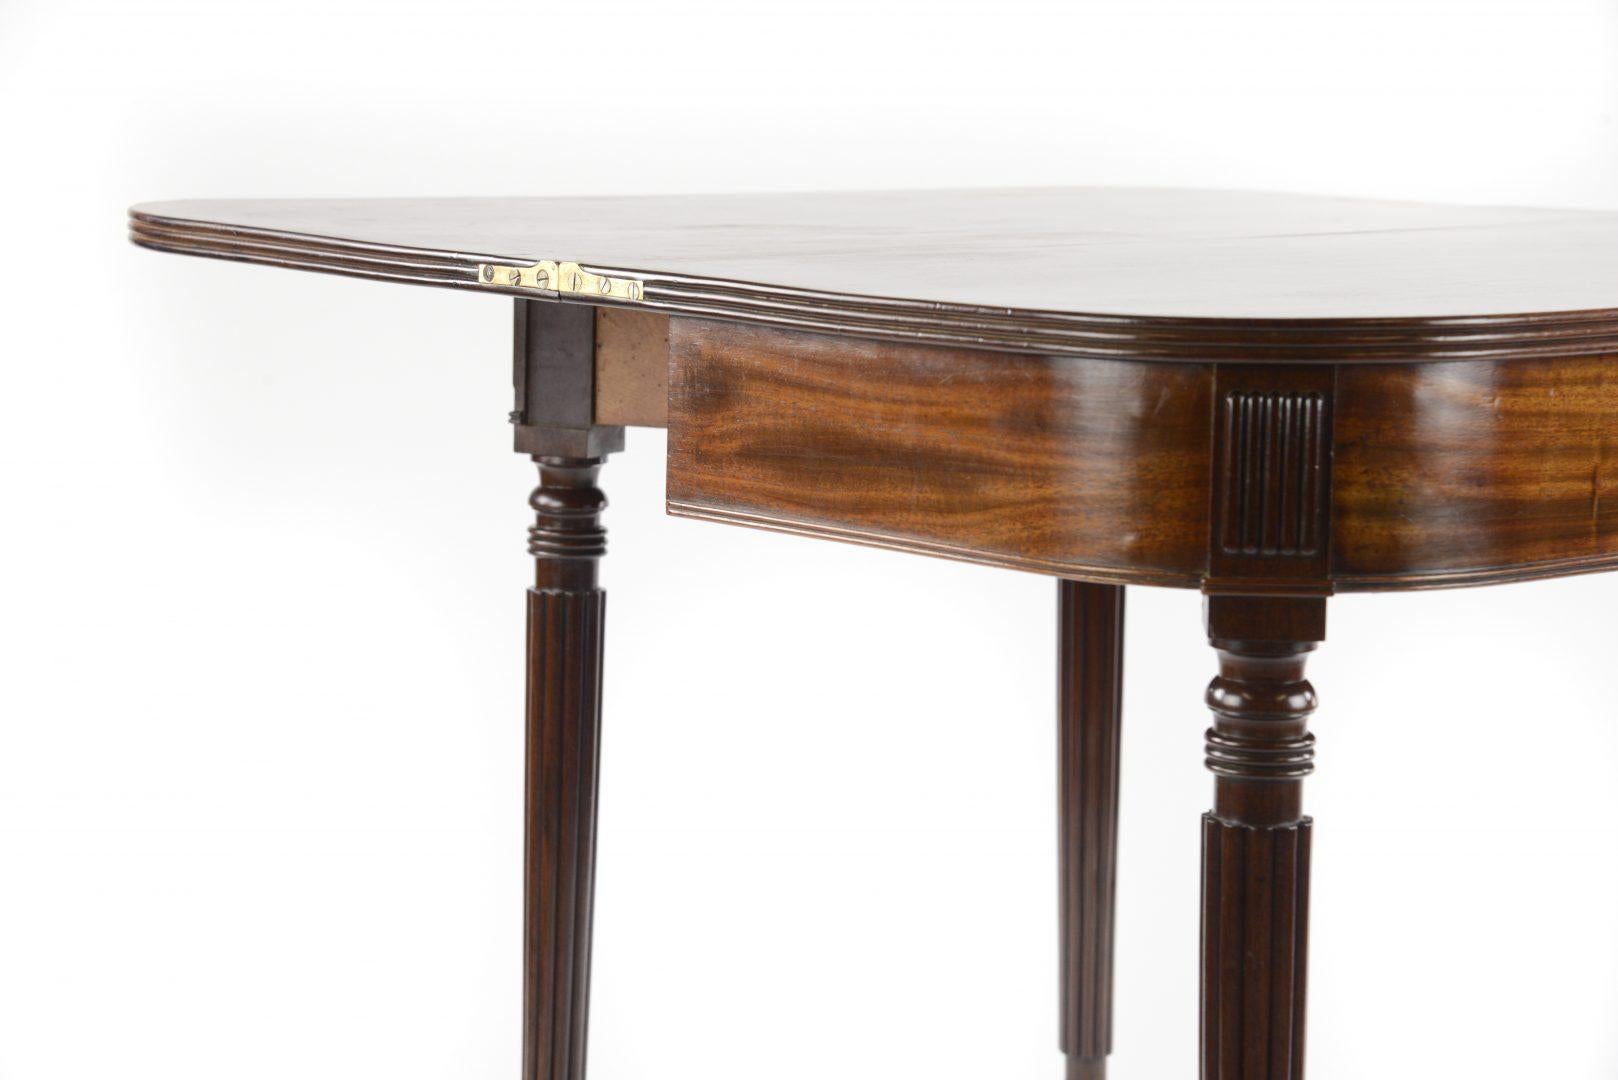 A Regency mahogany turnover top tea table, attributed Gillows, raised on turned tapered reeded legs terminating in brass castors.

Gillows of Lancaster and London, also known as Gillow & Co., was an English furniture making firm based in